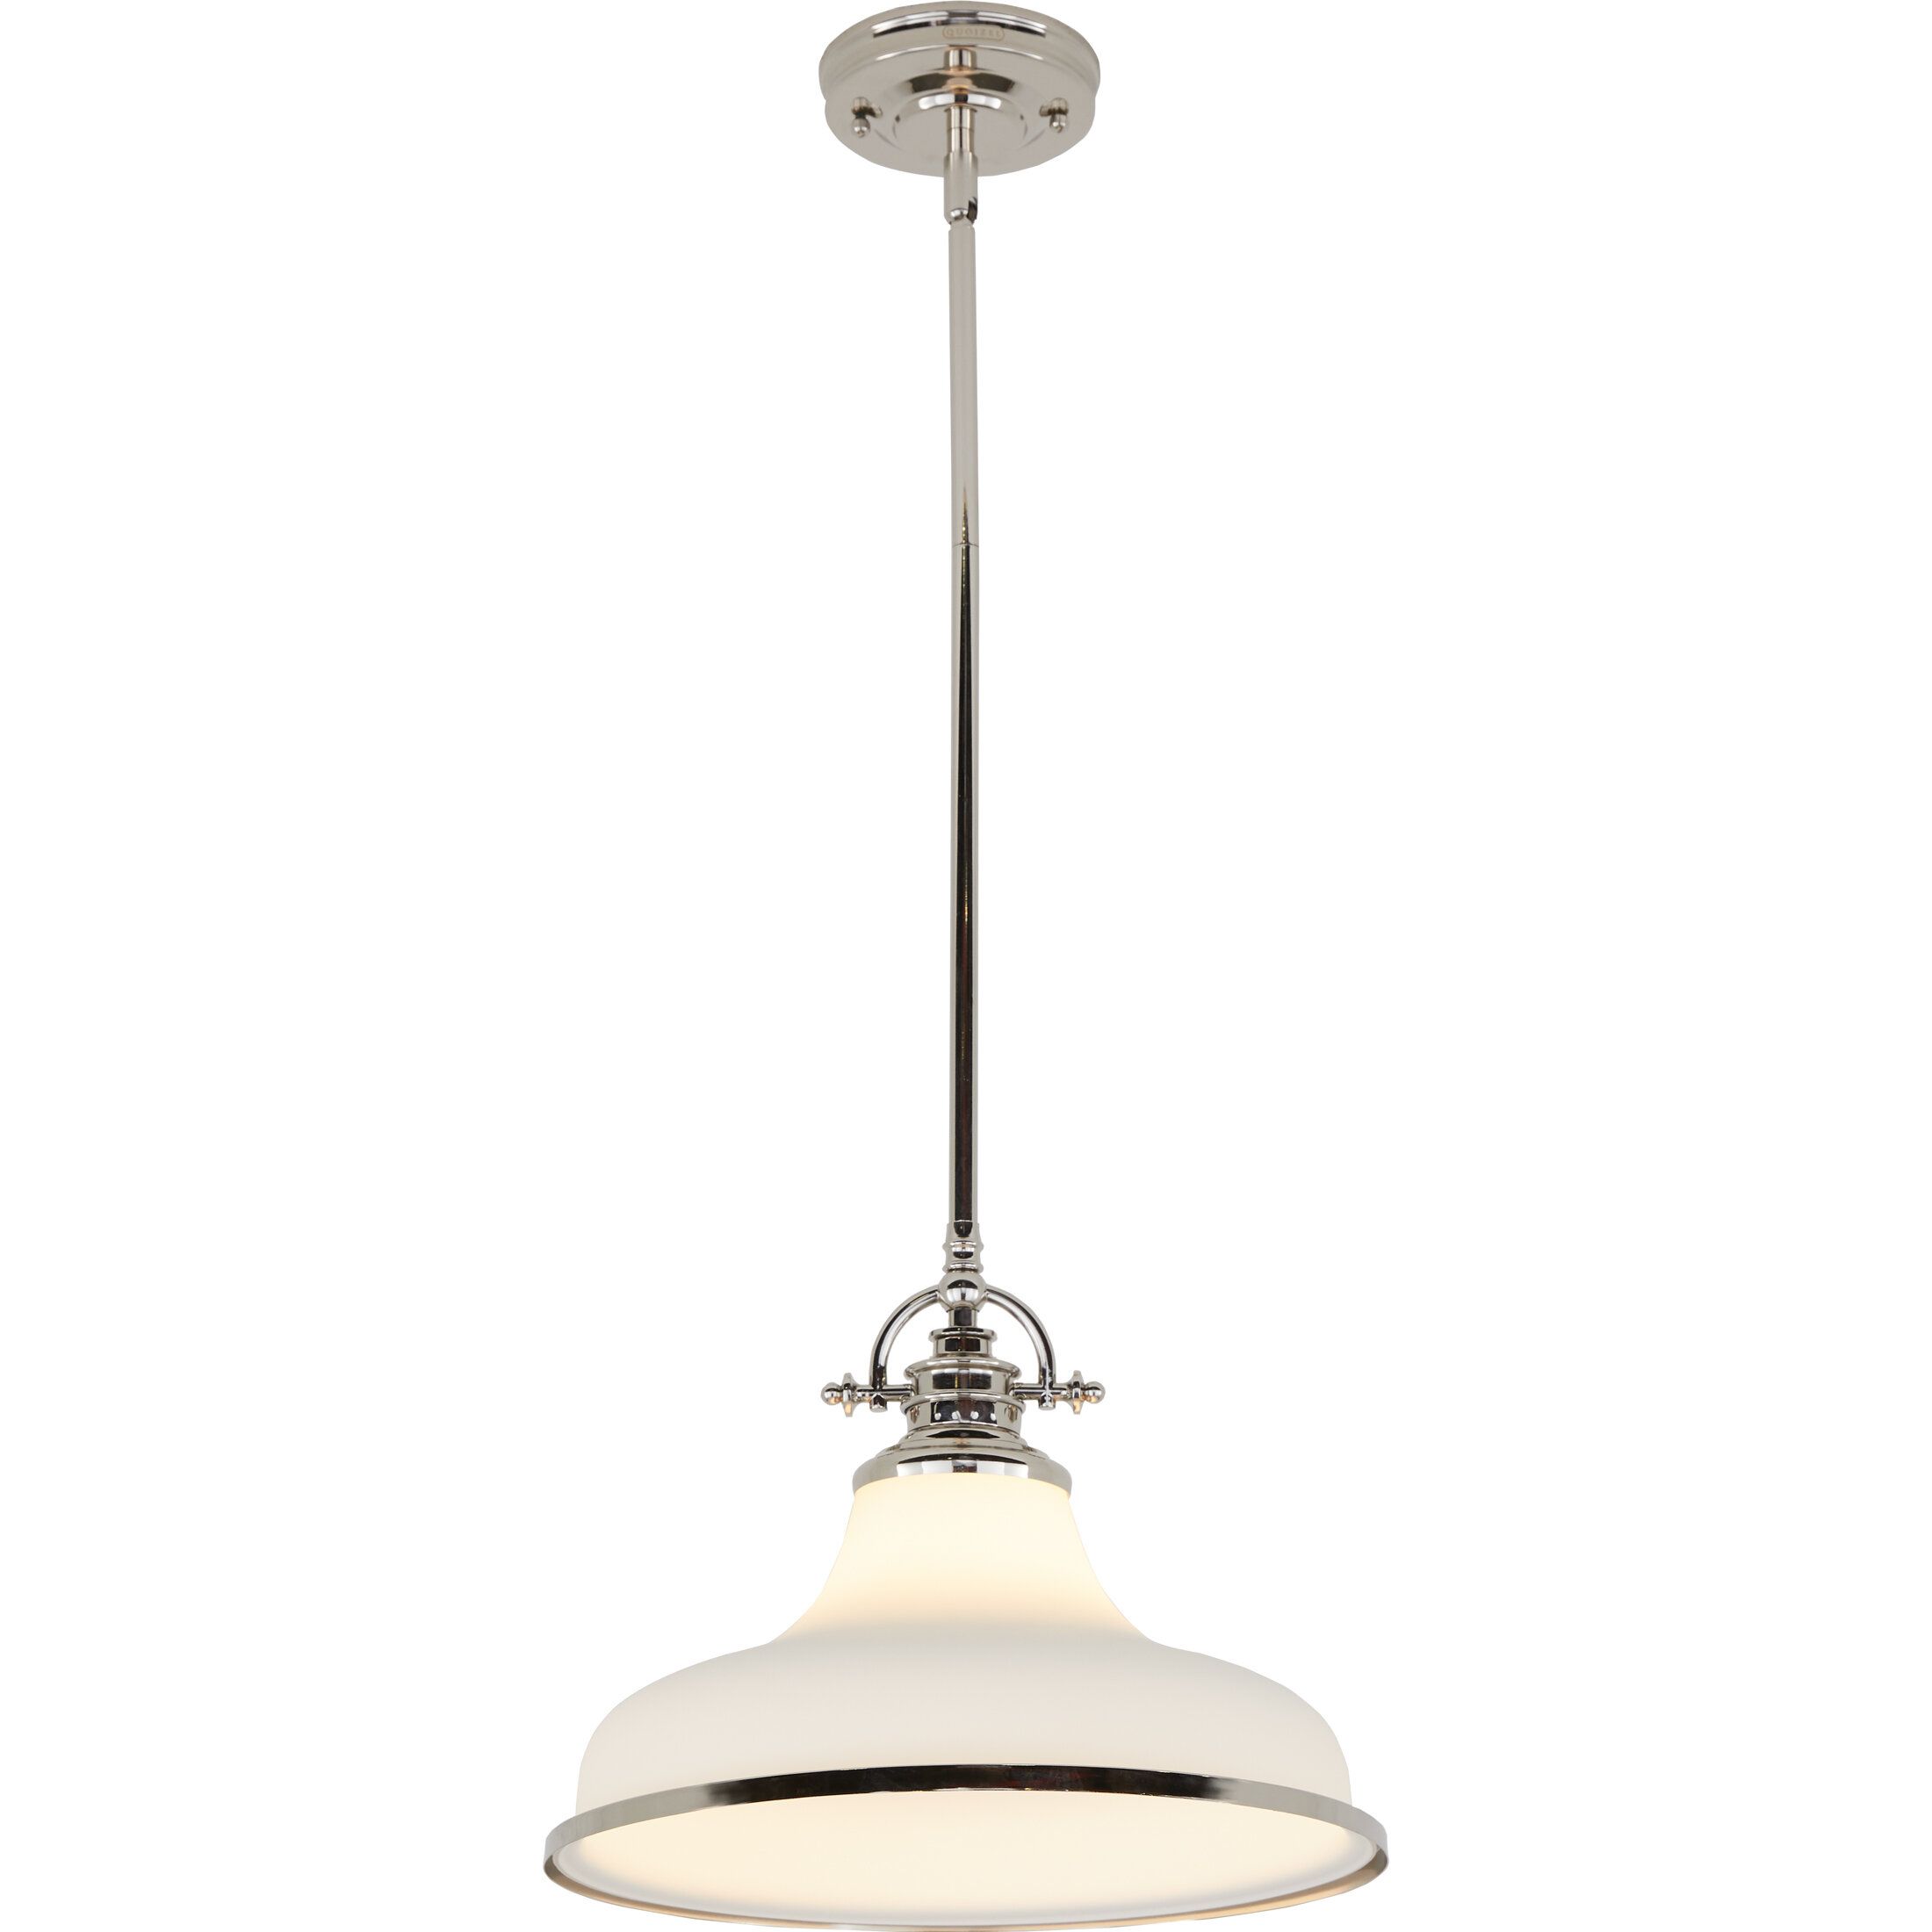 Meghan 1 Light Dome Pendant With Regard To Macon 1 Light Single Dome Pendants (View 16 of 30)